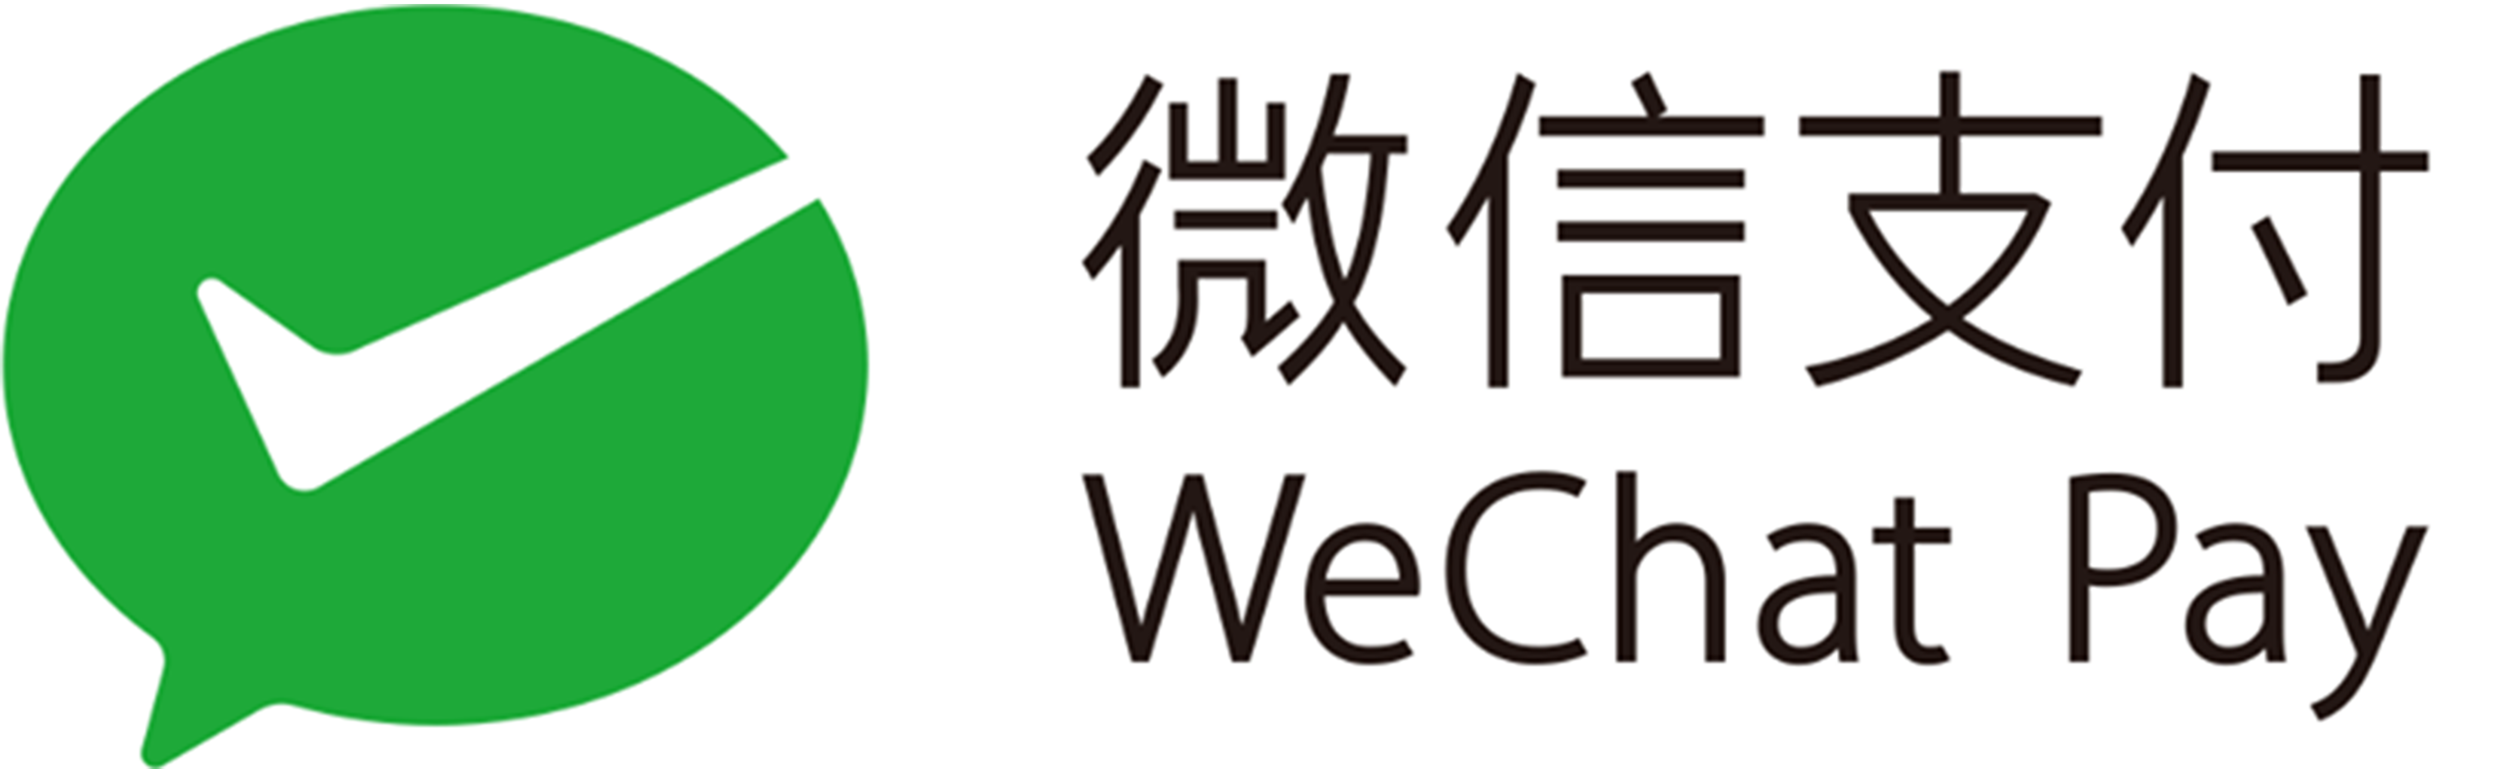 WeChat Pay (1).png